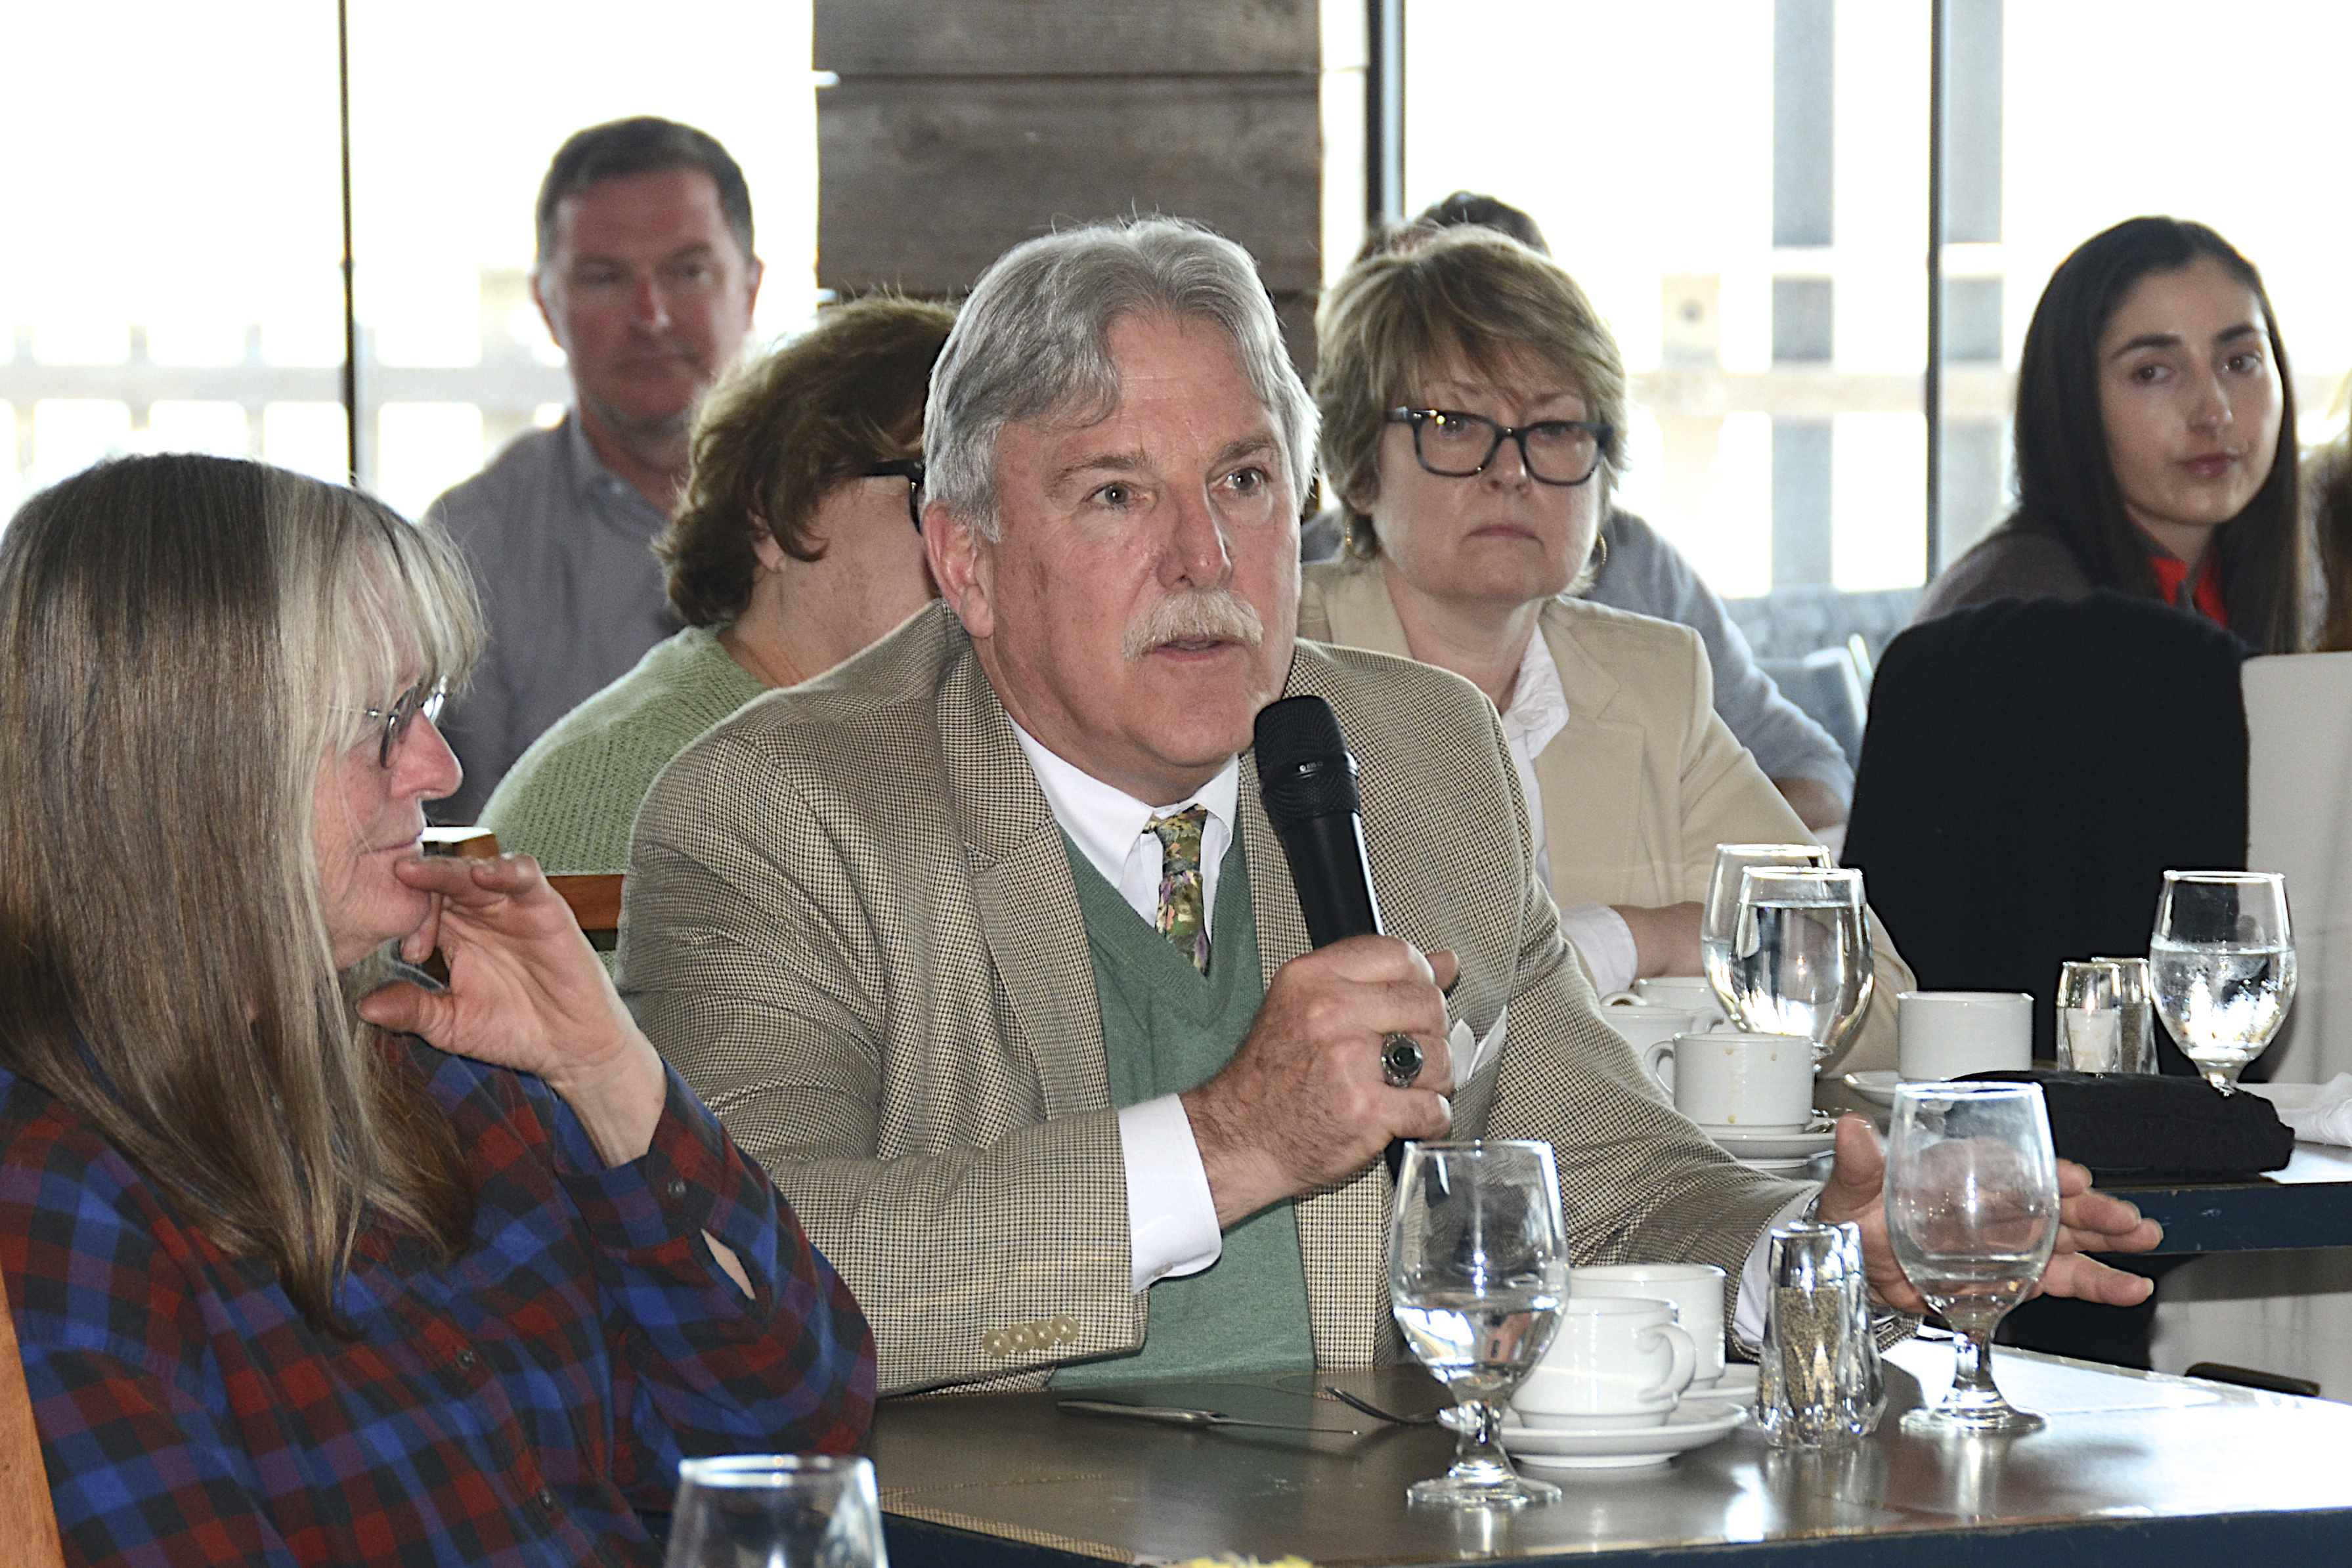 Chris Kelley asks a question at the Express Session in Montauk on Friday.